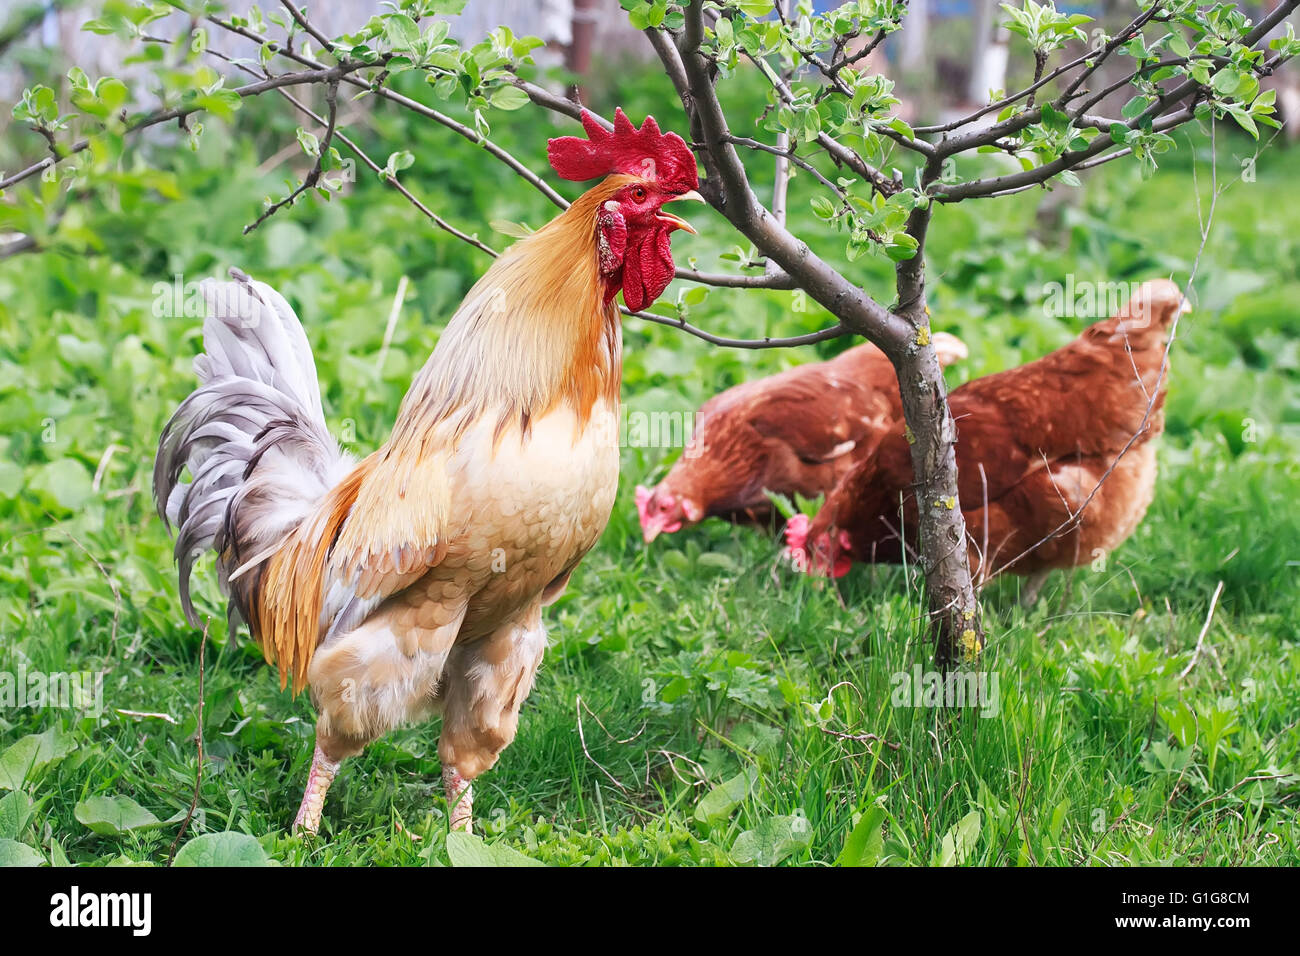 a bright red rooster sings among the green grass and the chickens on the farm Stock Photo